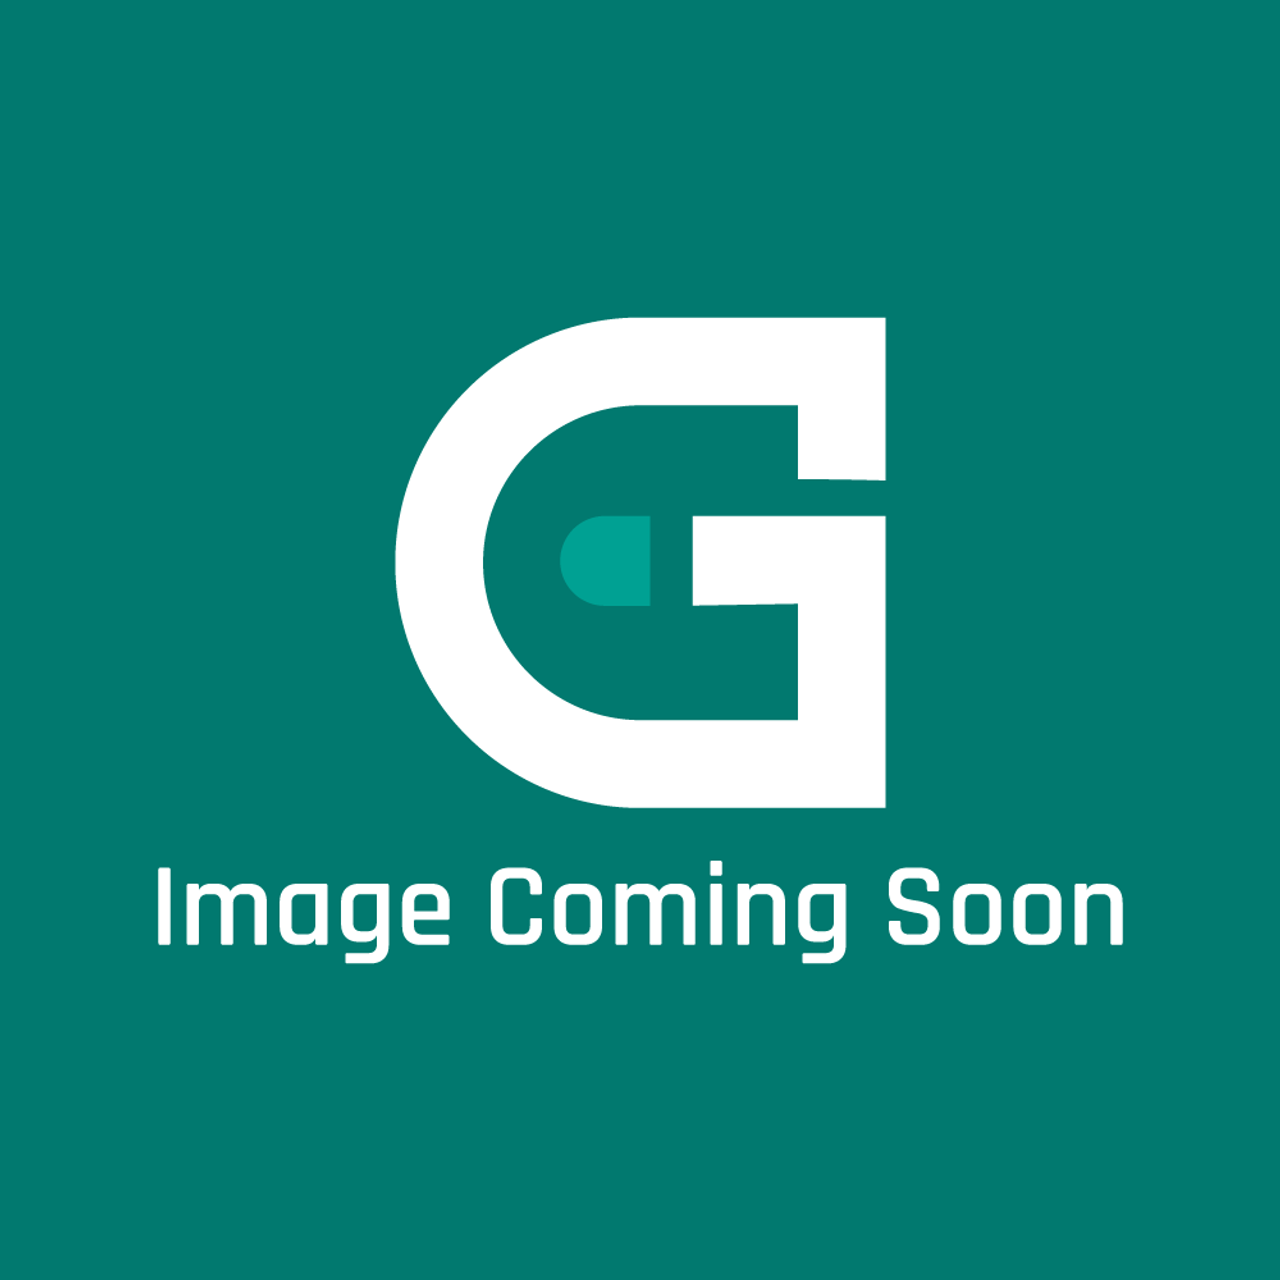 Frigidaire - Electrolux 5304500048 Box - Image Coming Soon!